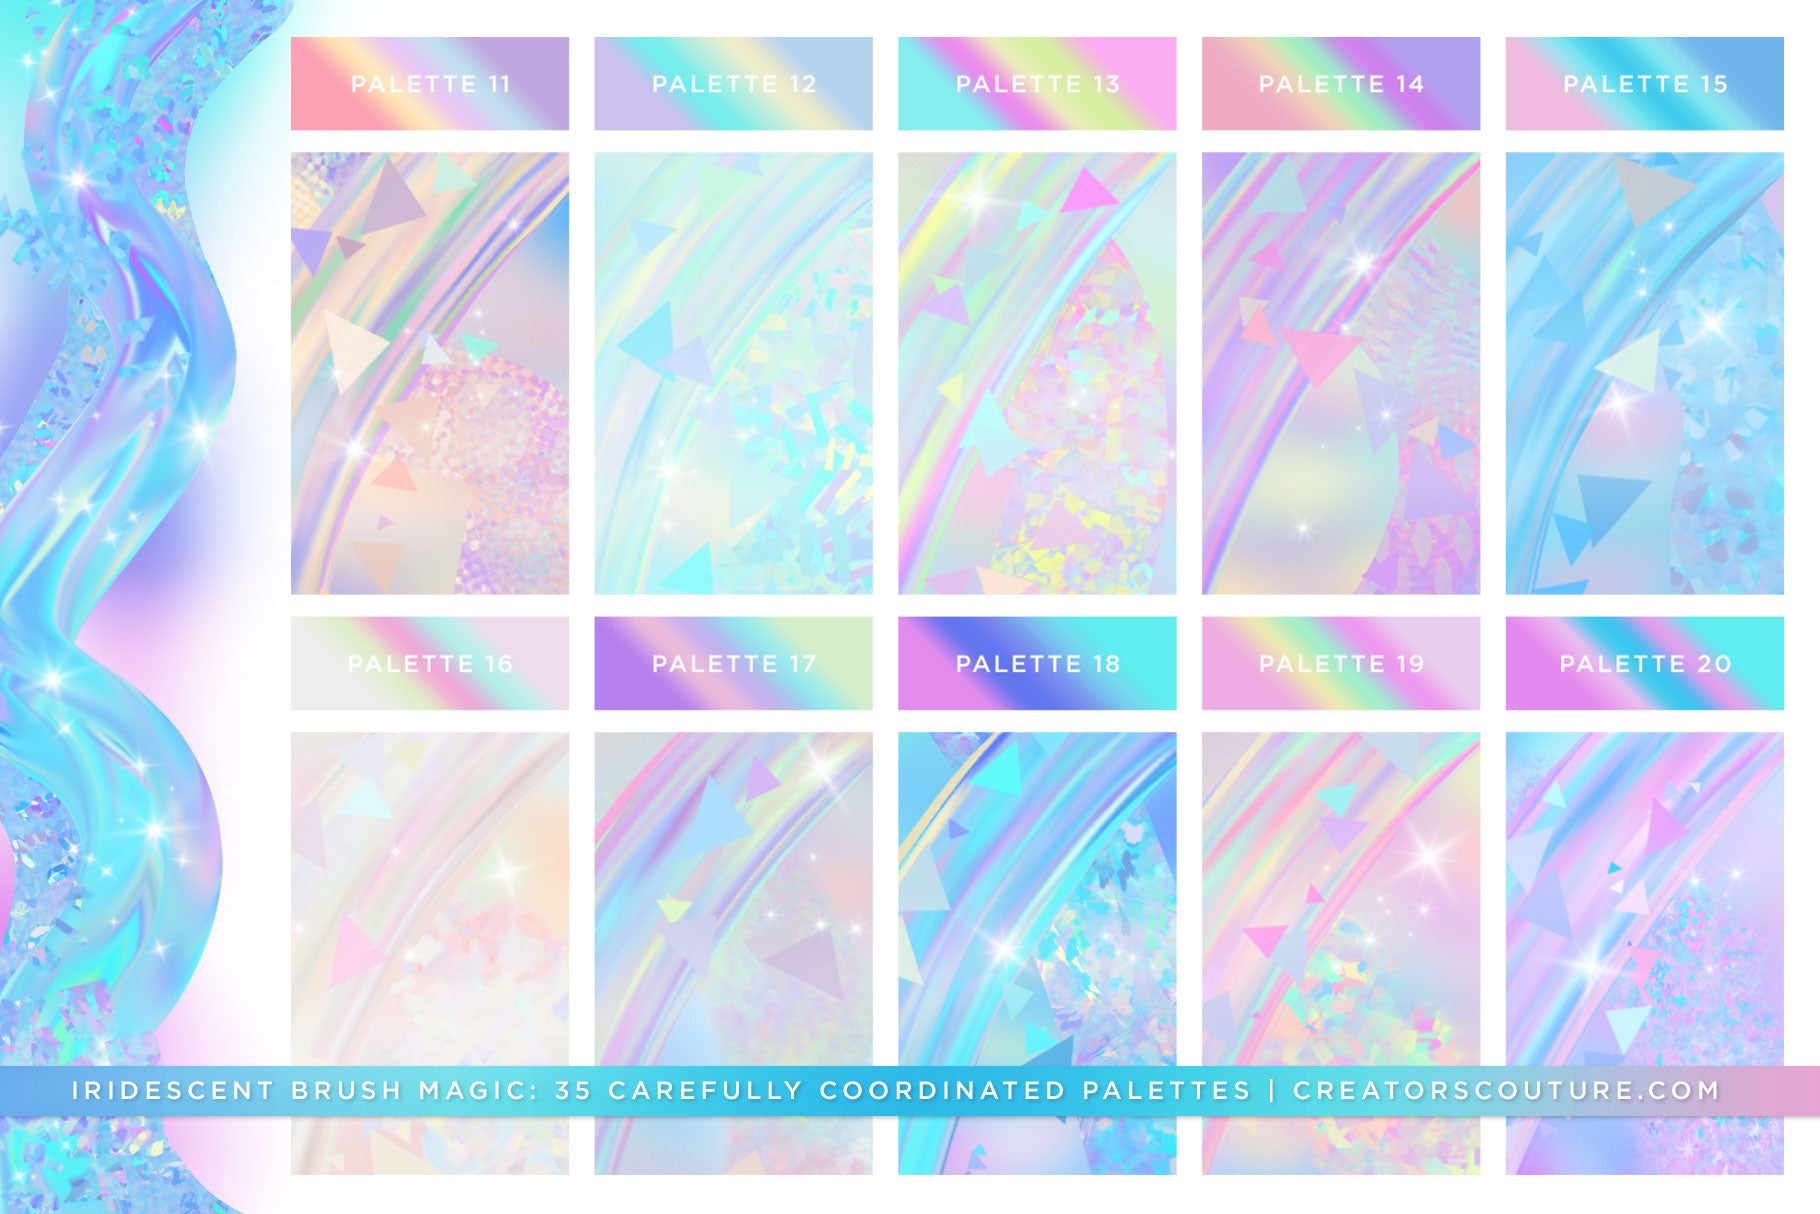 photoshop brushes for instant iridescent and holographic effects and brush strokes, iridescent palette preview chart 2